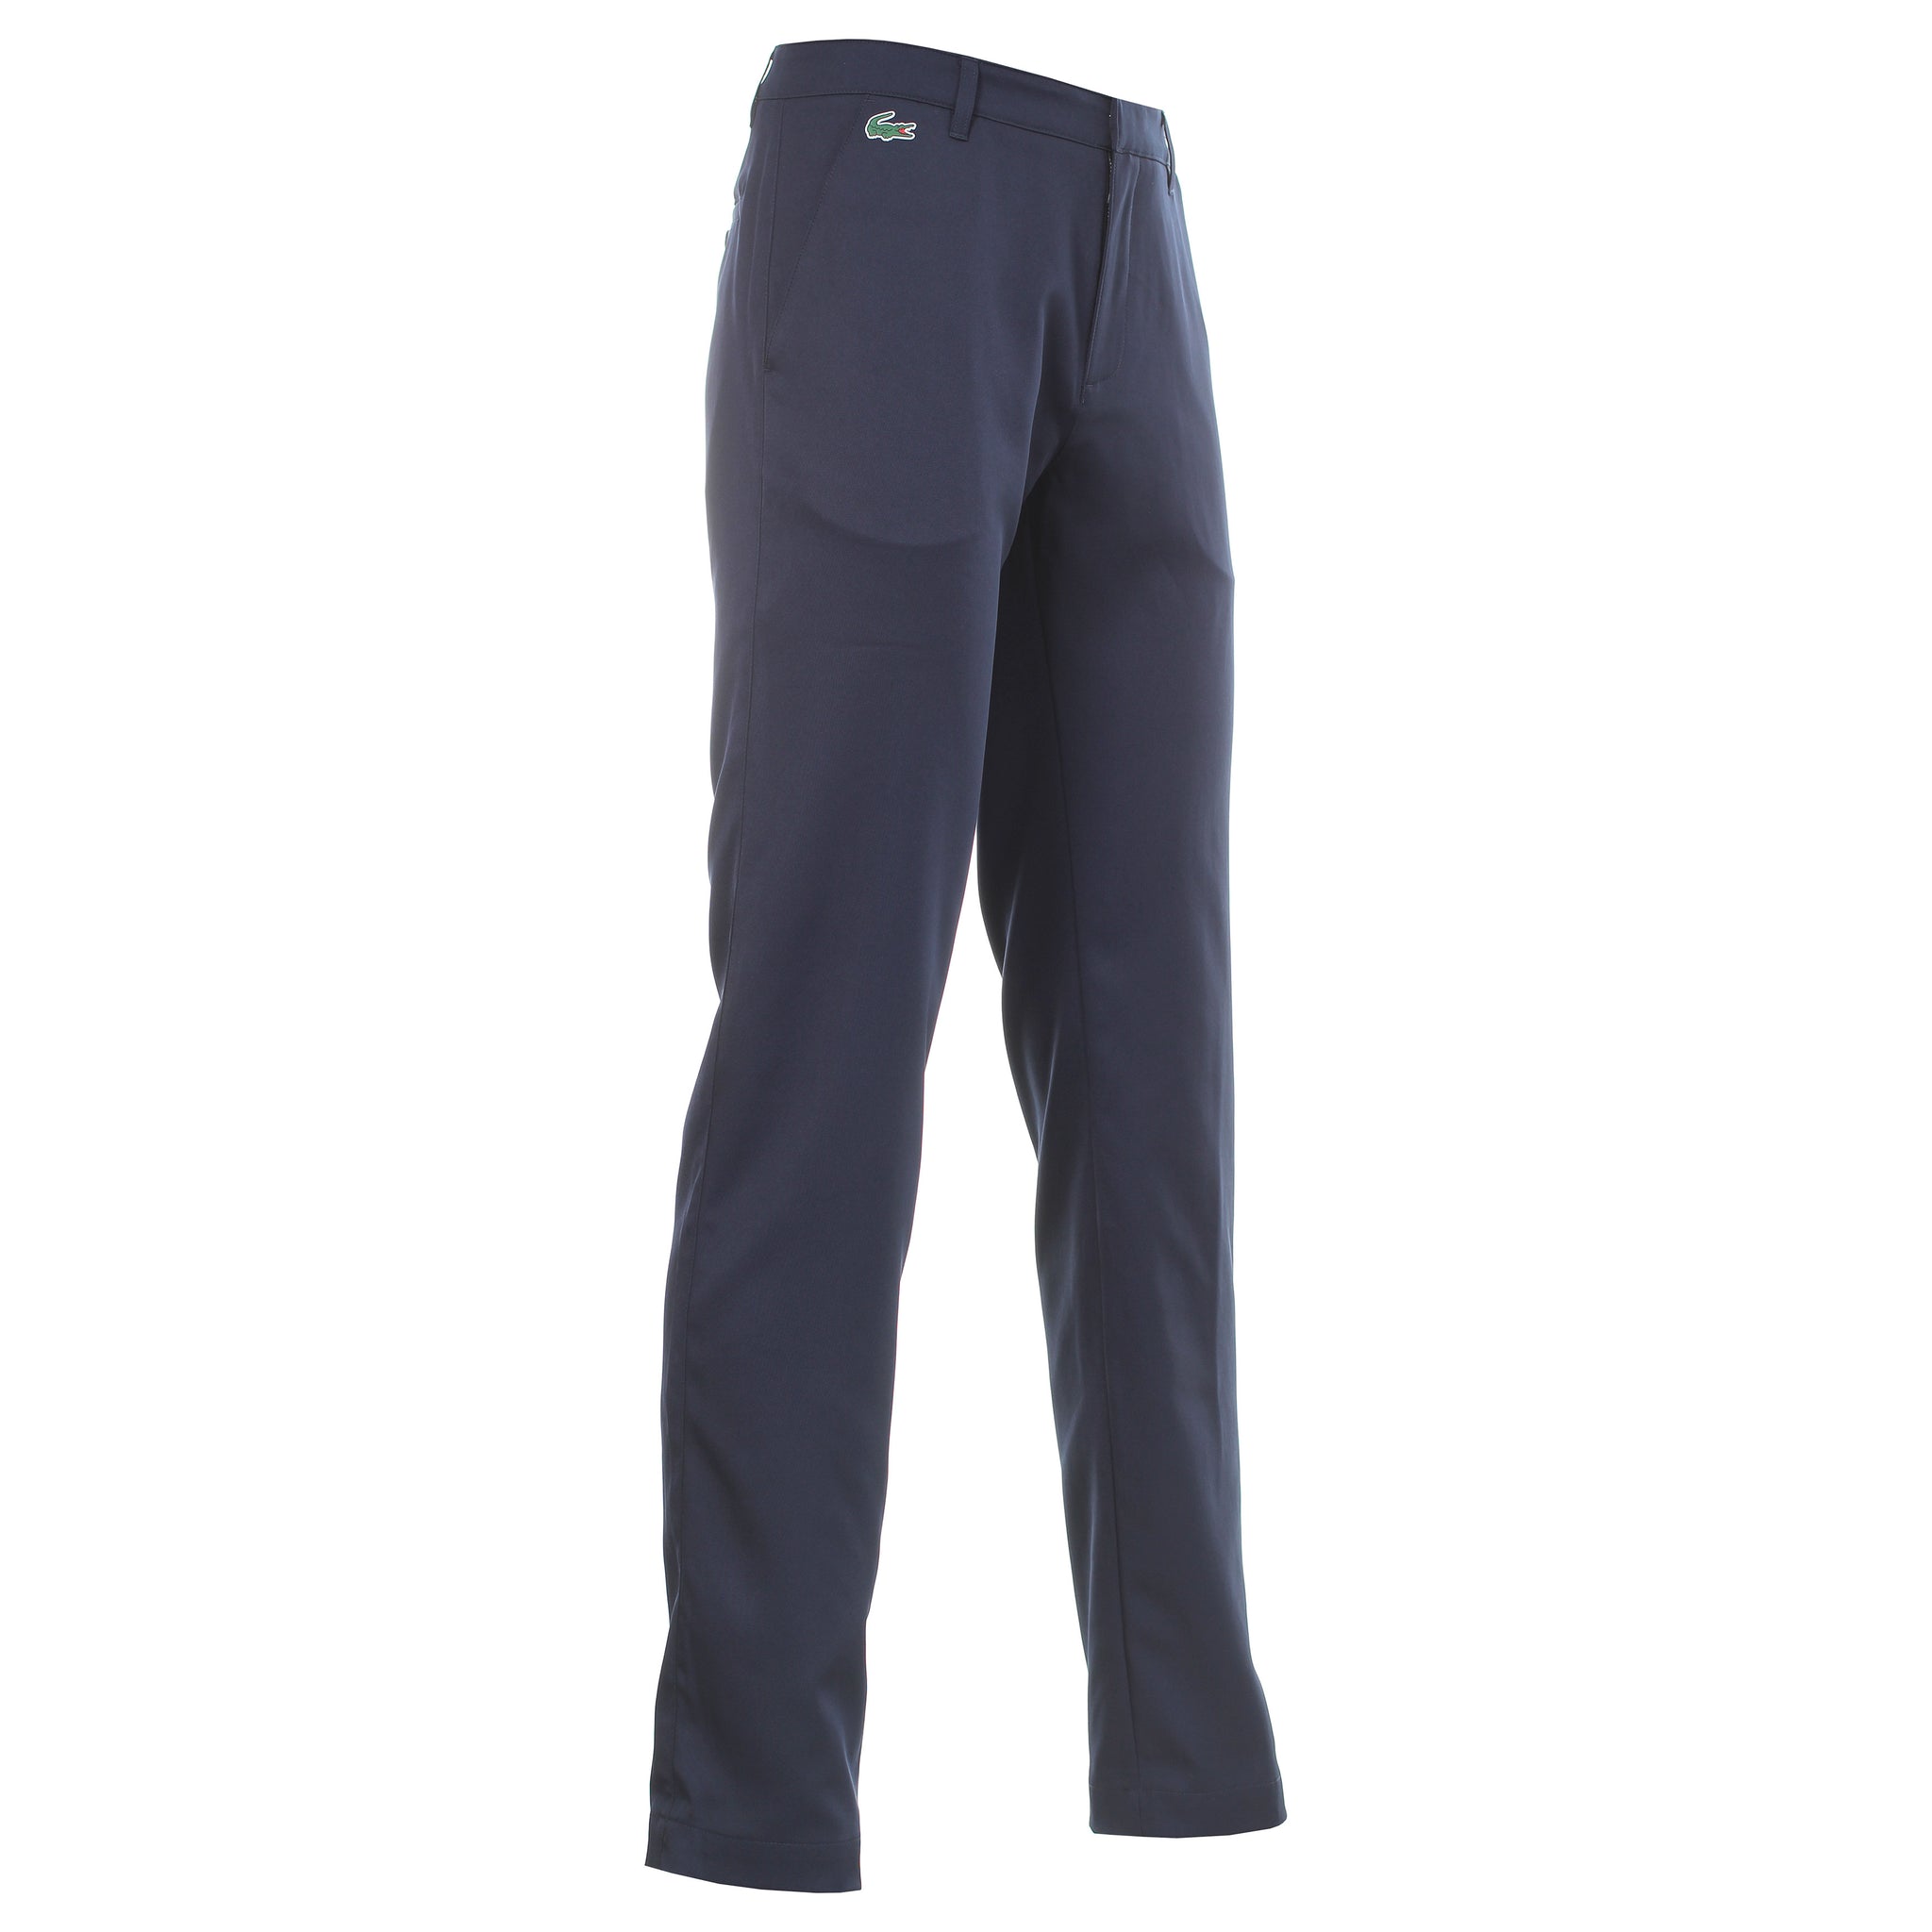 lacoste-technical-chino-pants-hh3768-navy-166